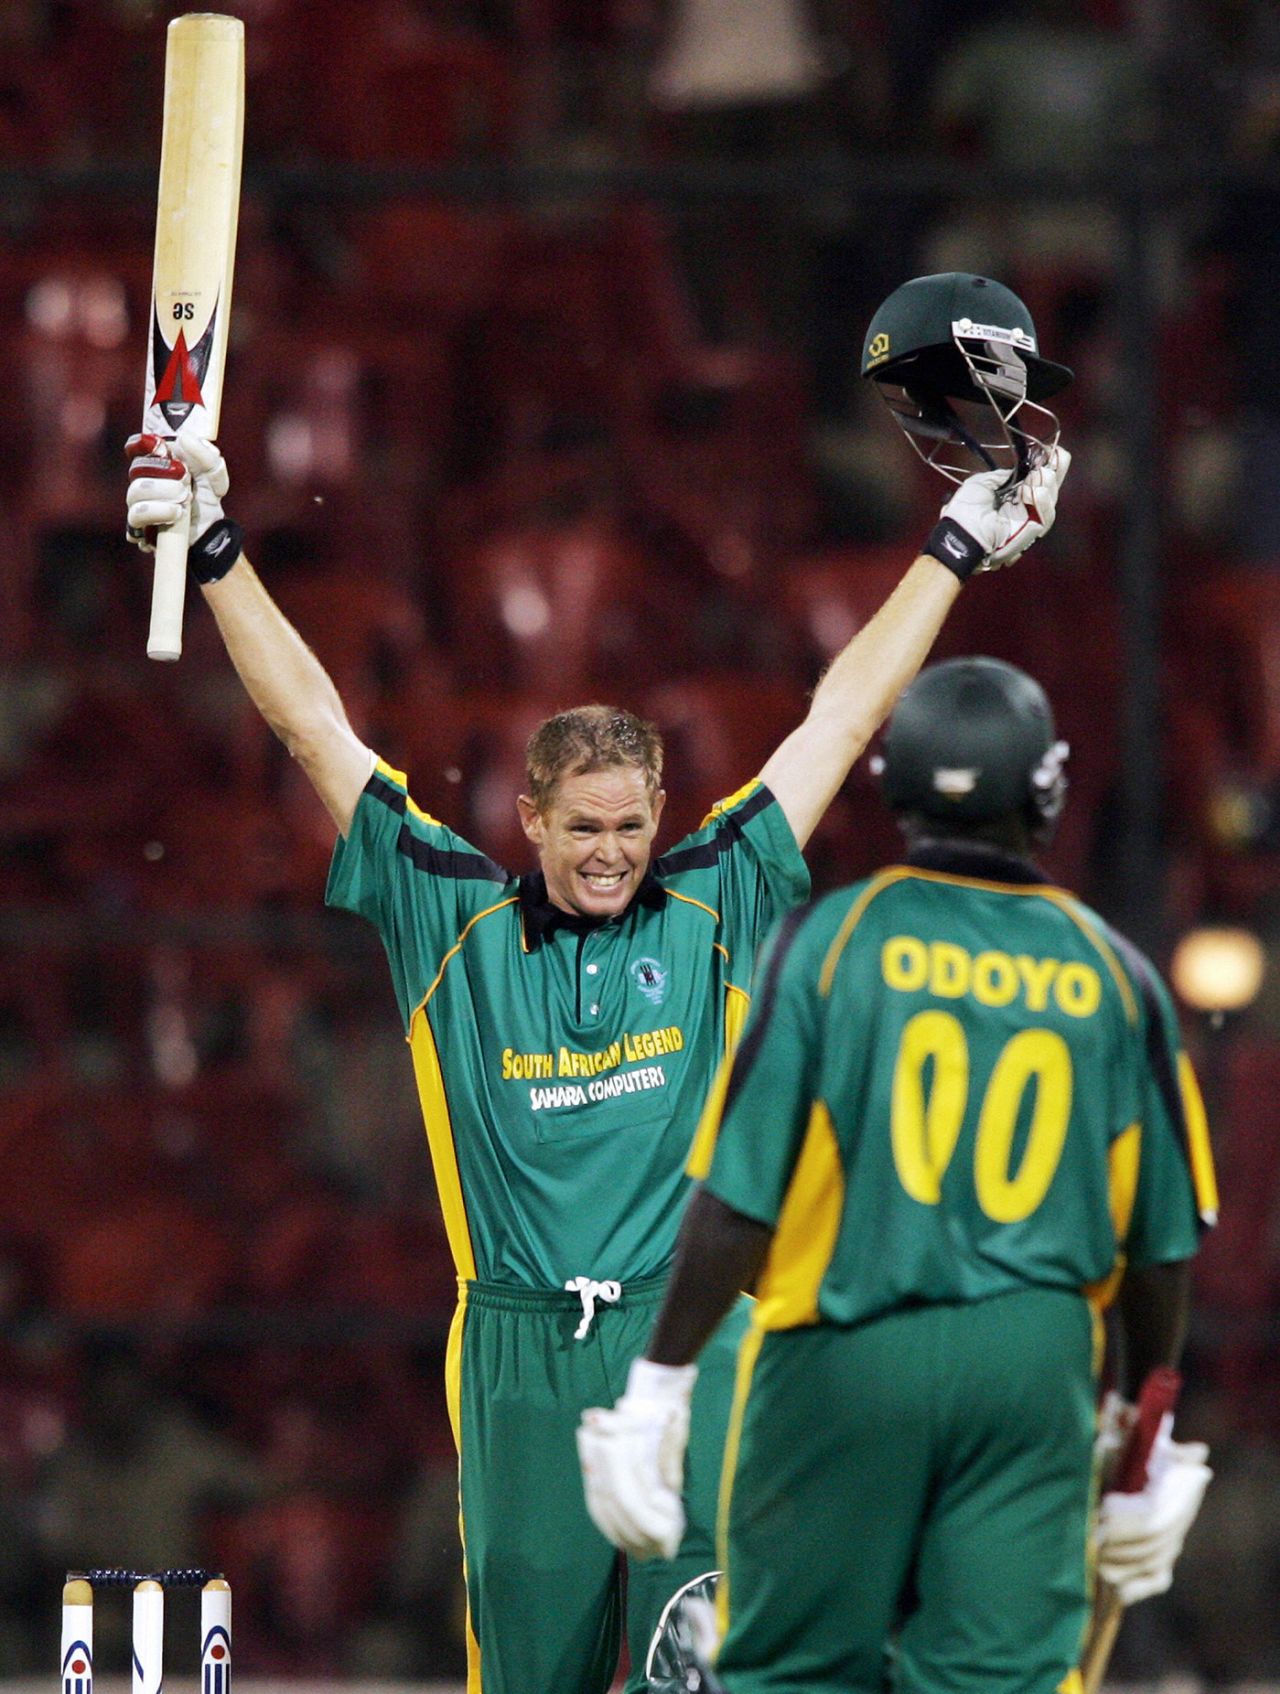 Shaun Pollock is ecstatic on his maiden ODI century with team mate Odoyo, 1st ODI, Afro Asia Cup, Bangalore, June 6, 2007